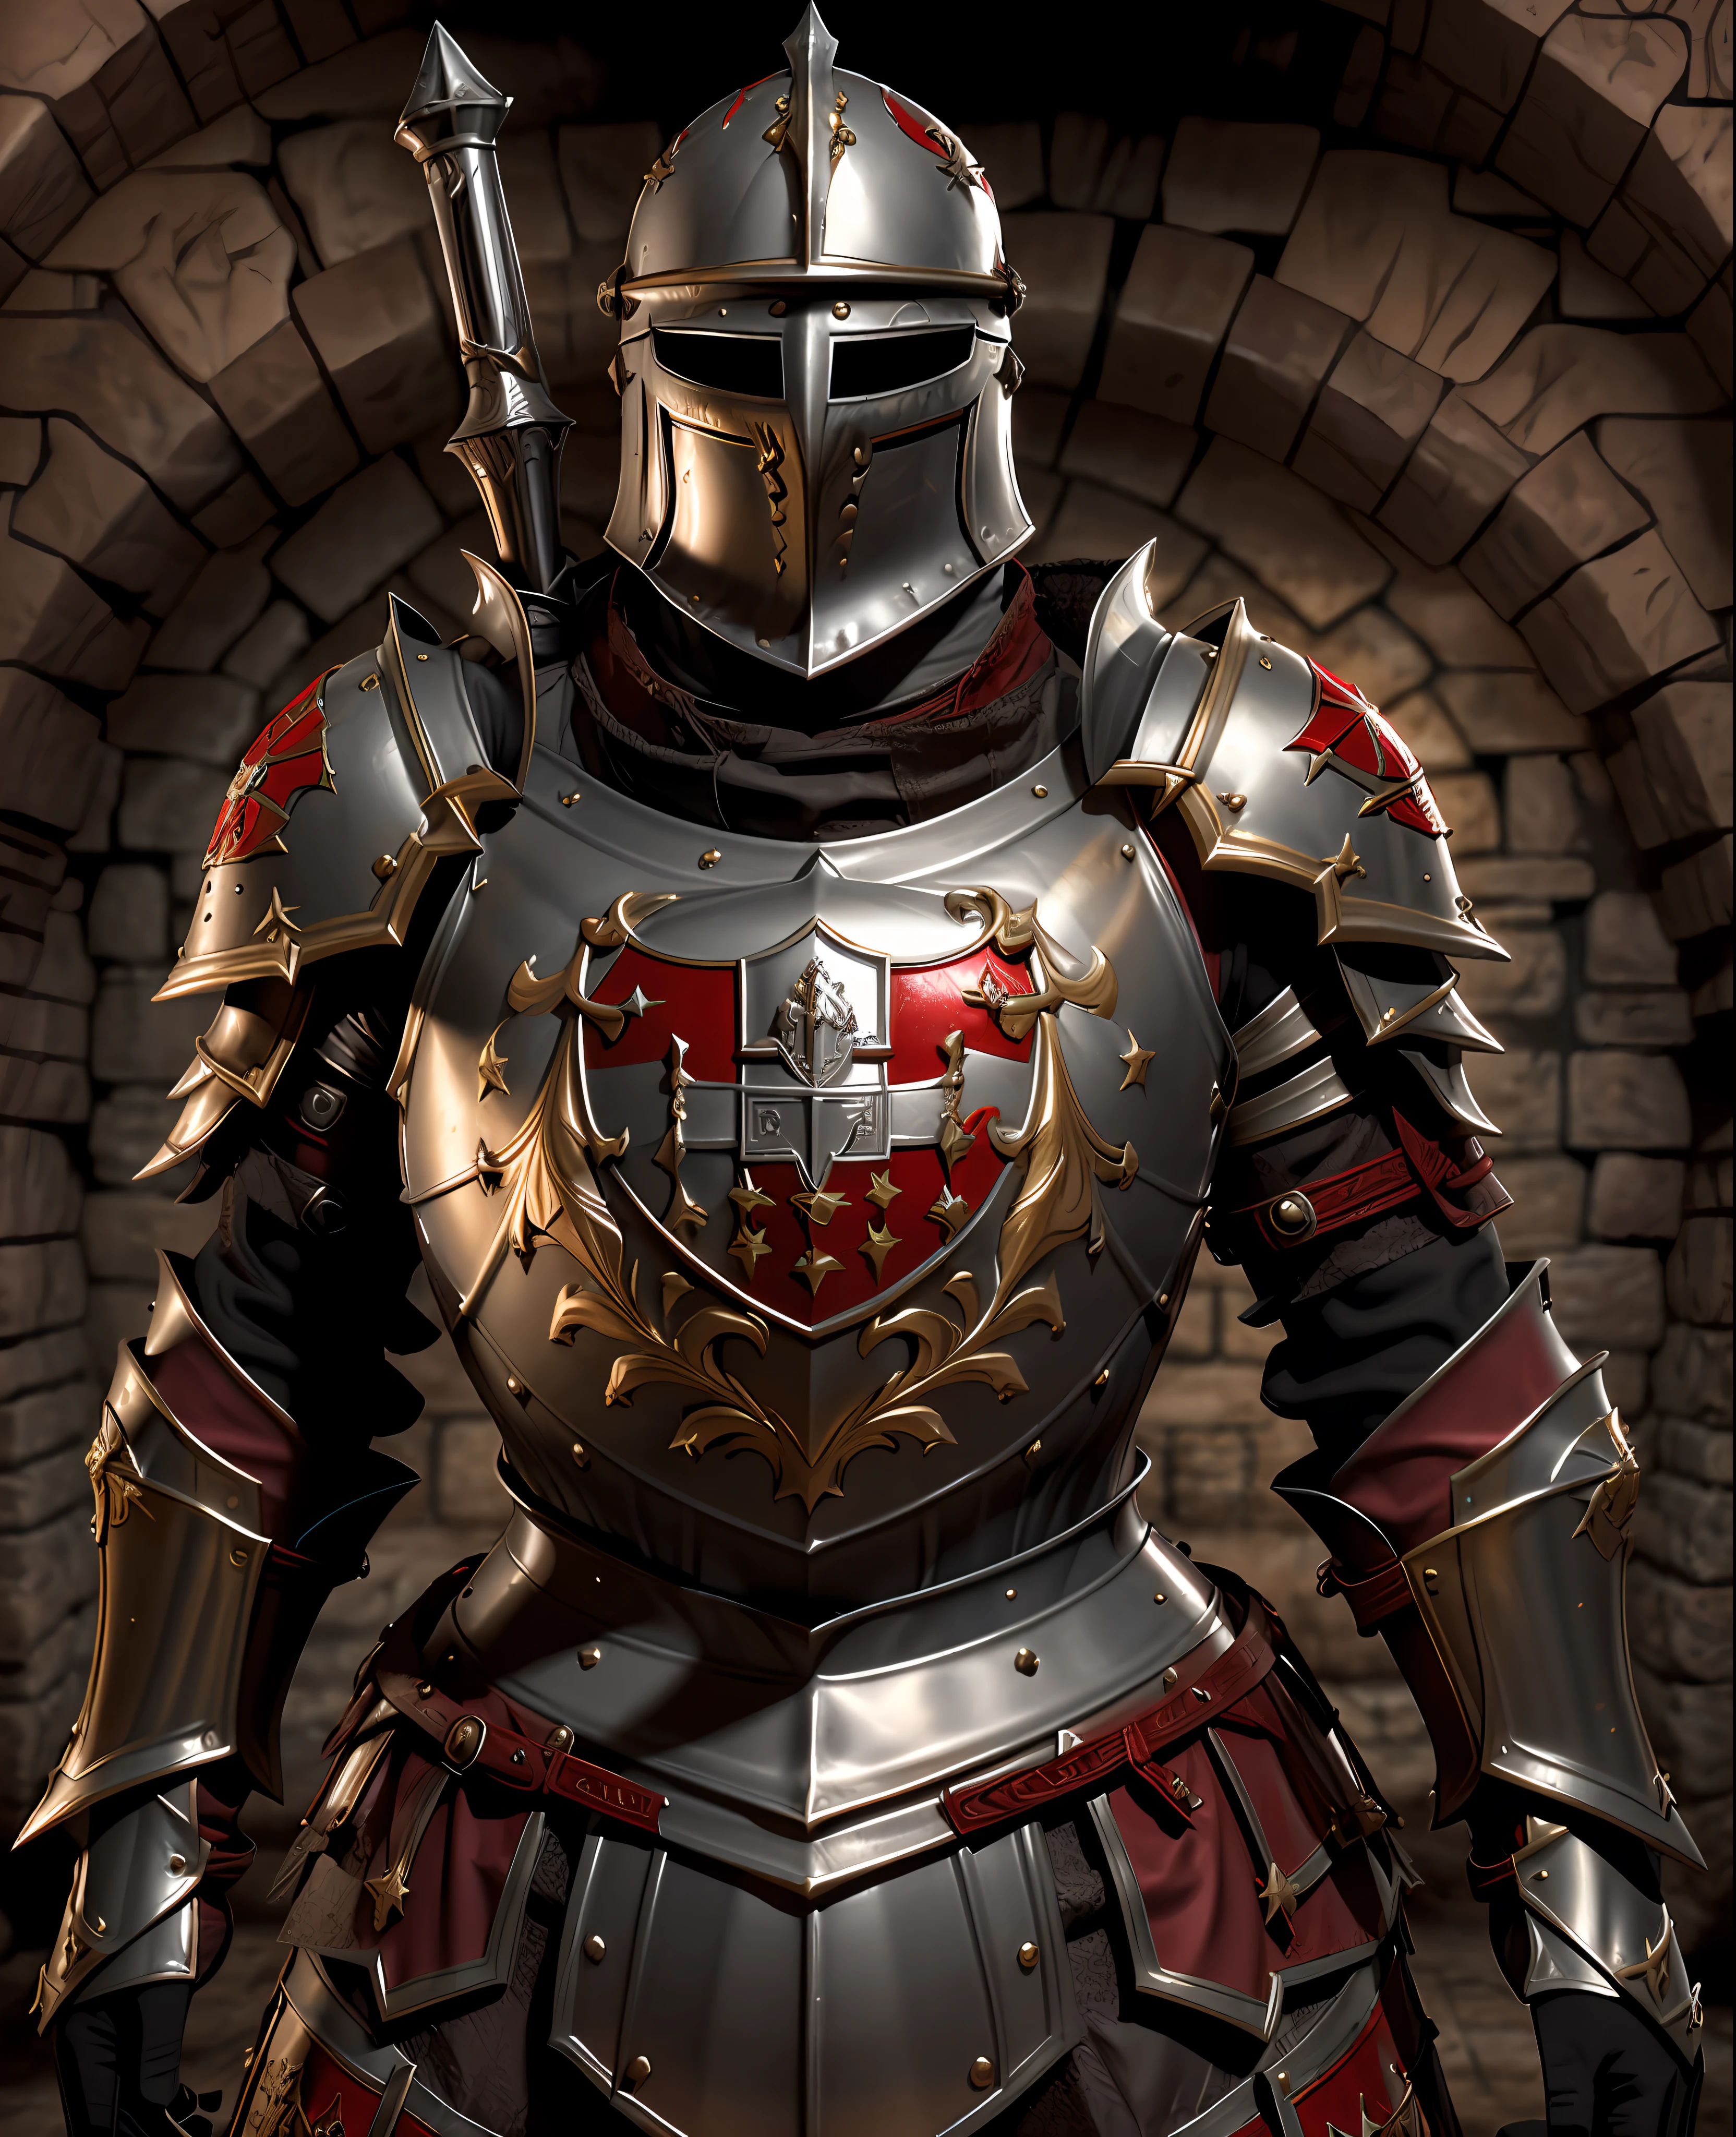 Knight Templar of the Crusades, with his silver armor with a red cross painted on the armor, Masterpiece artwork, best qualityer, realisitic, gazing at viewer, war scene from a medieval battle,